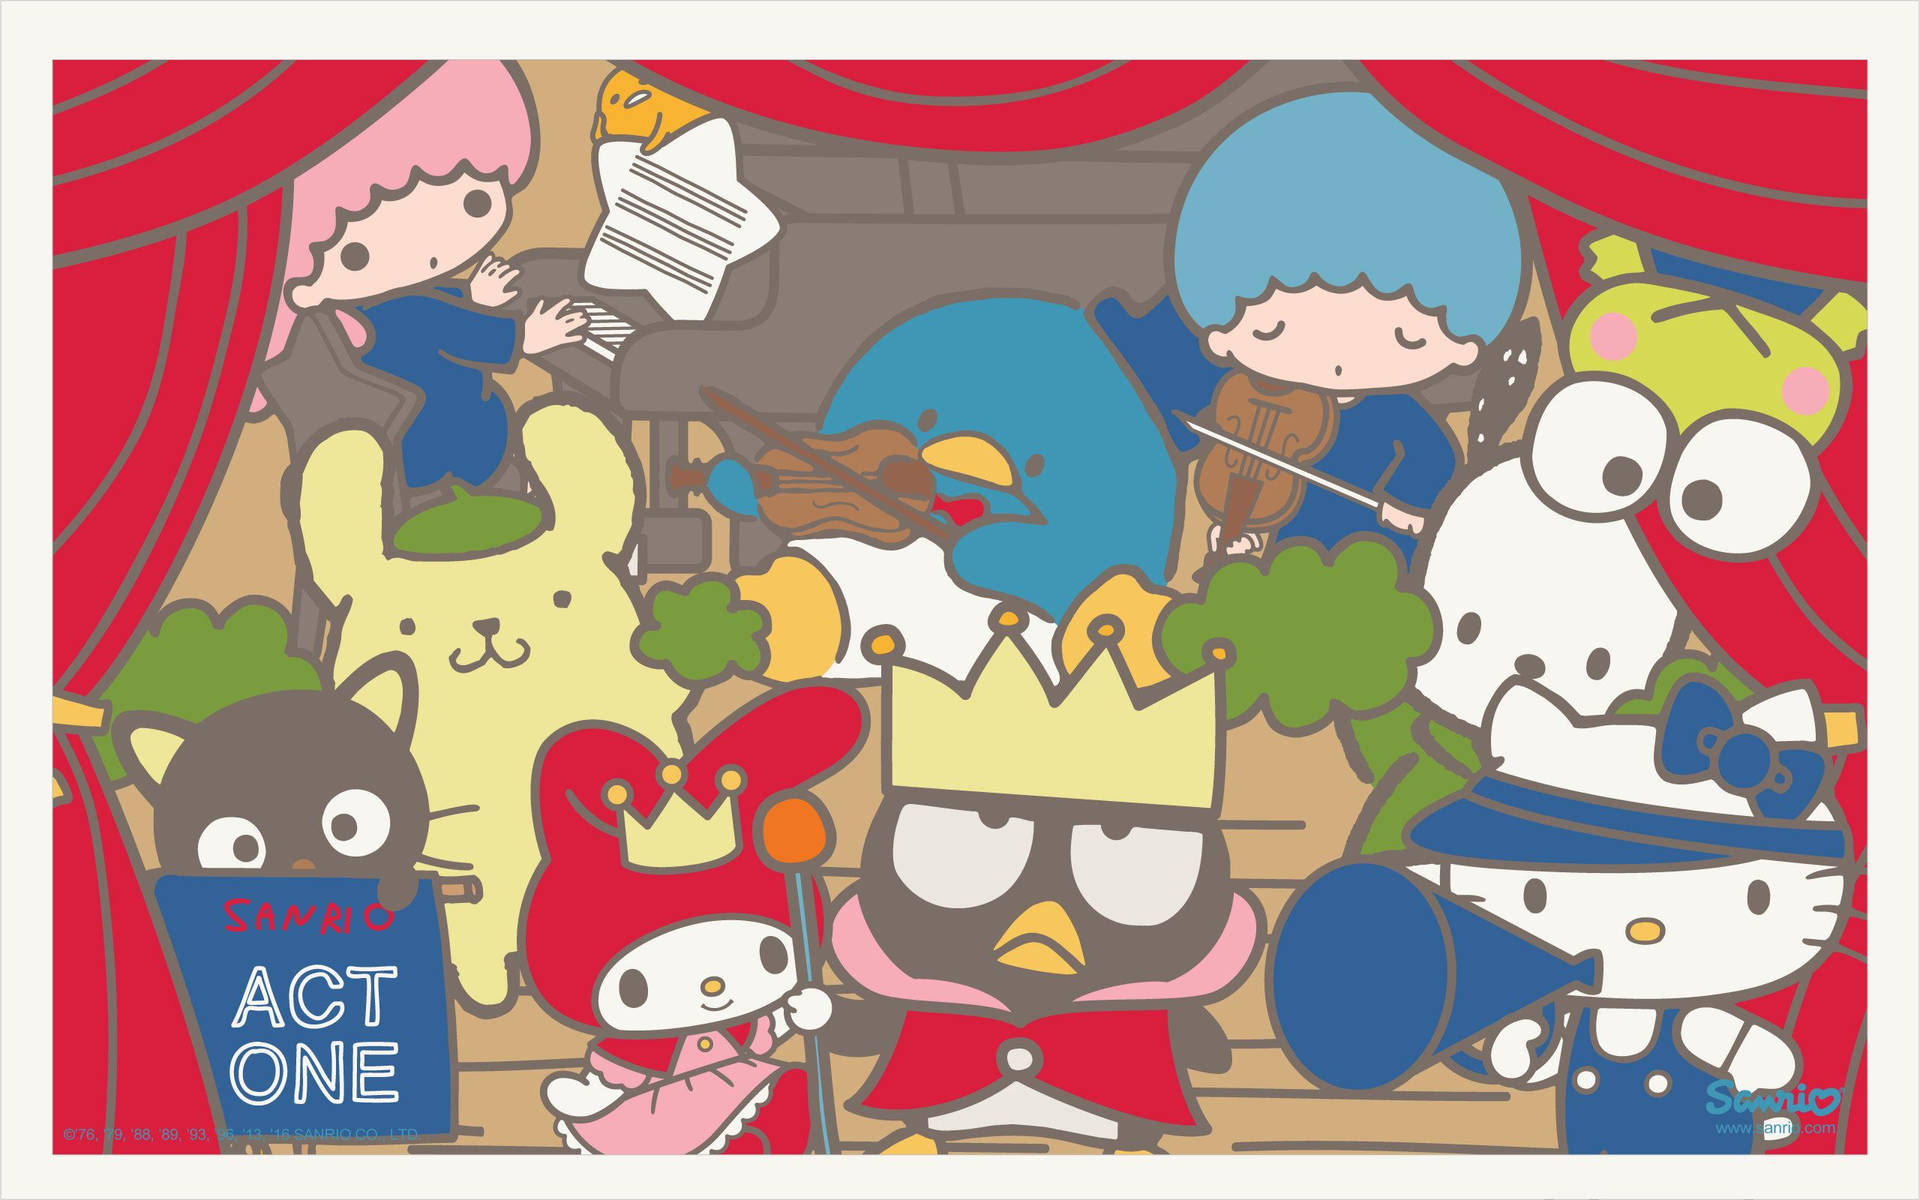 Sanrio on X: Take #Keroppi on the go with new backgrounds for